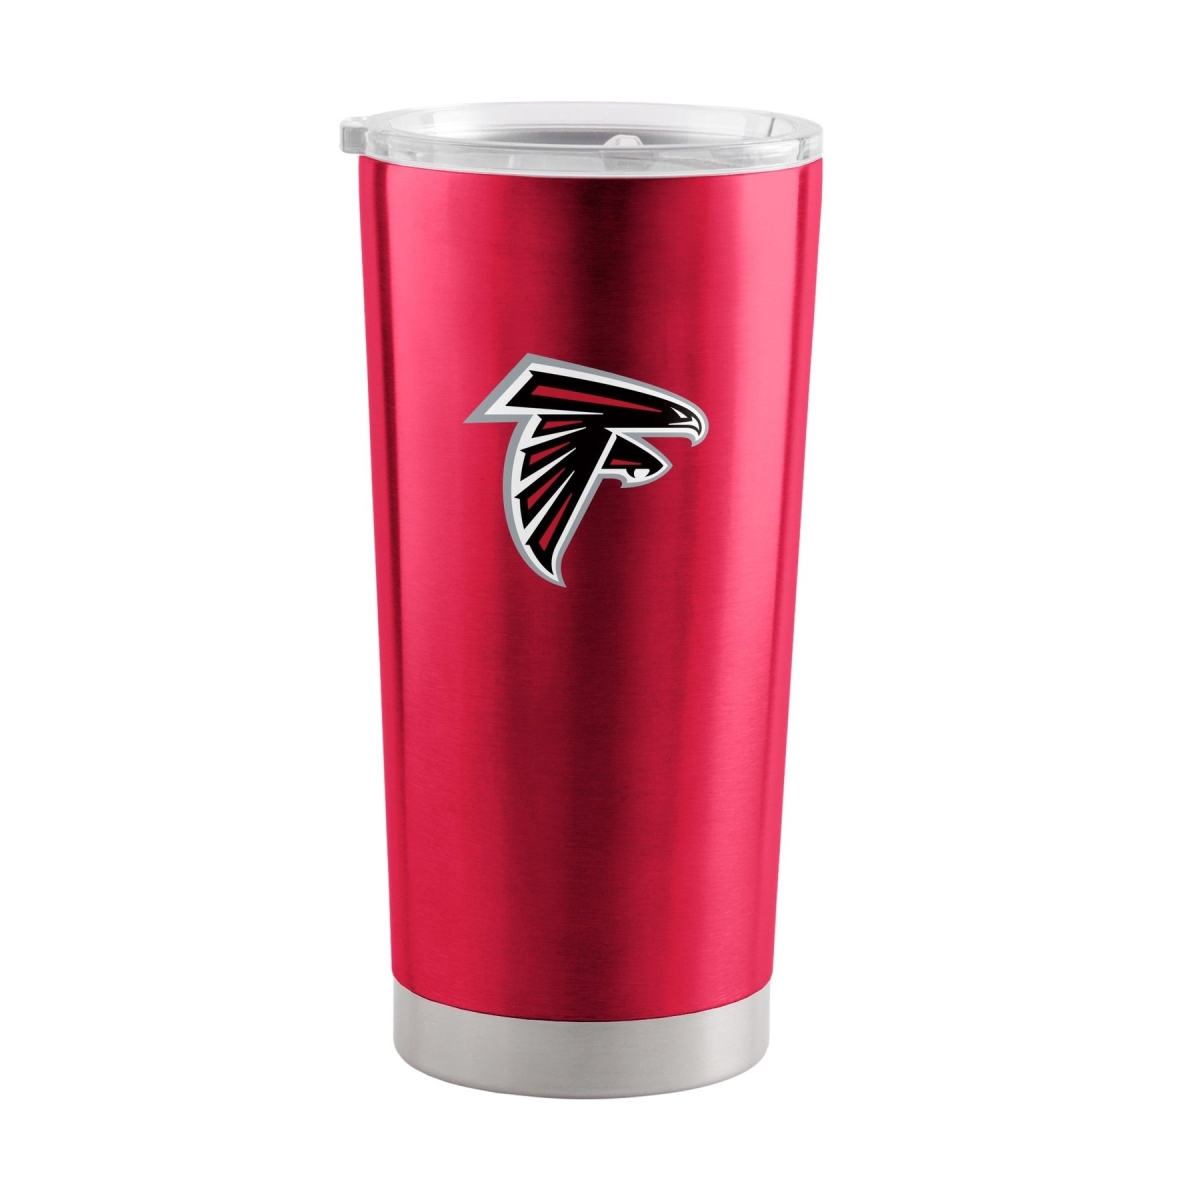 20 oz NFL Atlanta Falcons Gameday Stainless Steel Tumbler -  Moment-in-Time, MO3032171